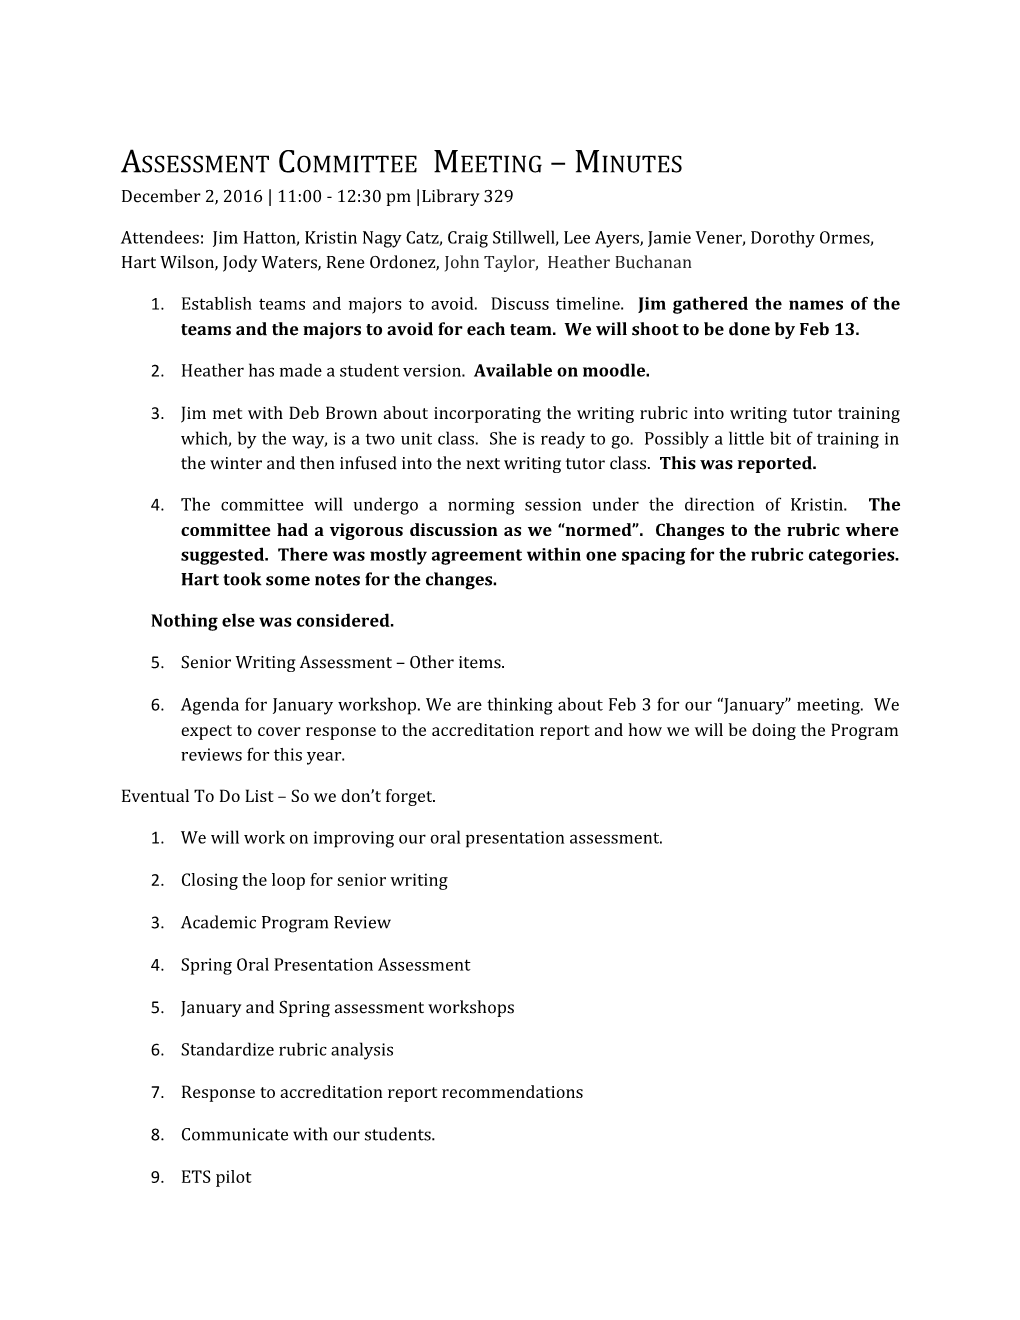 Assessment Committee Meeting Minutes